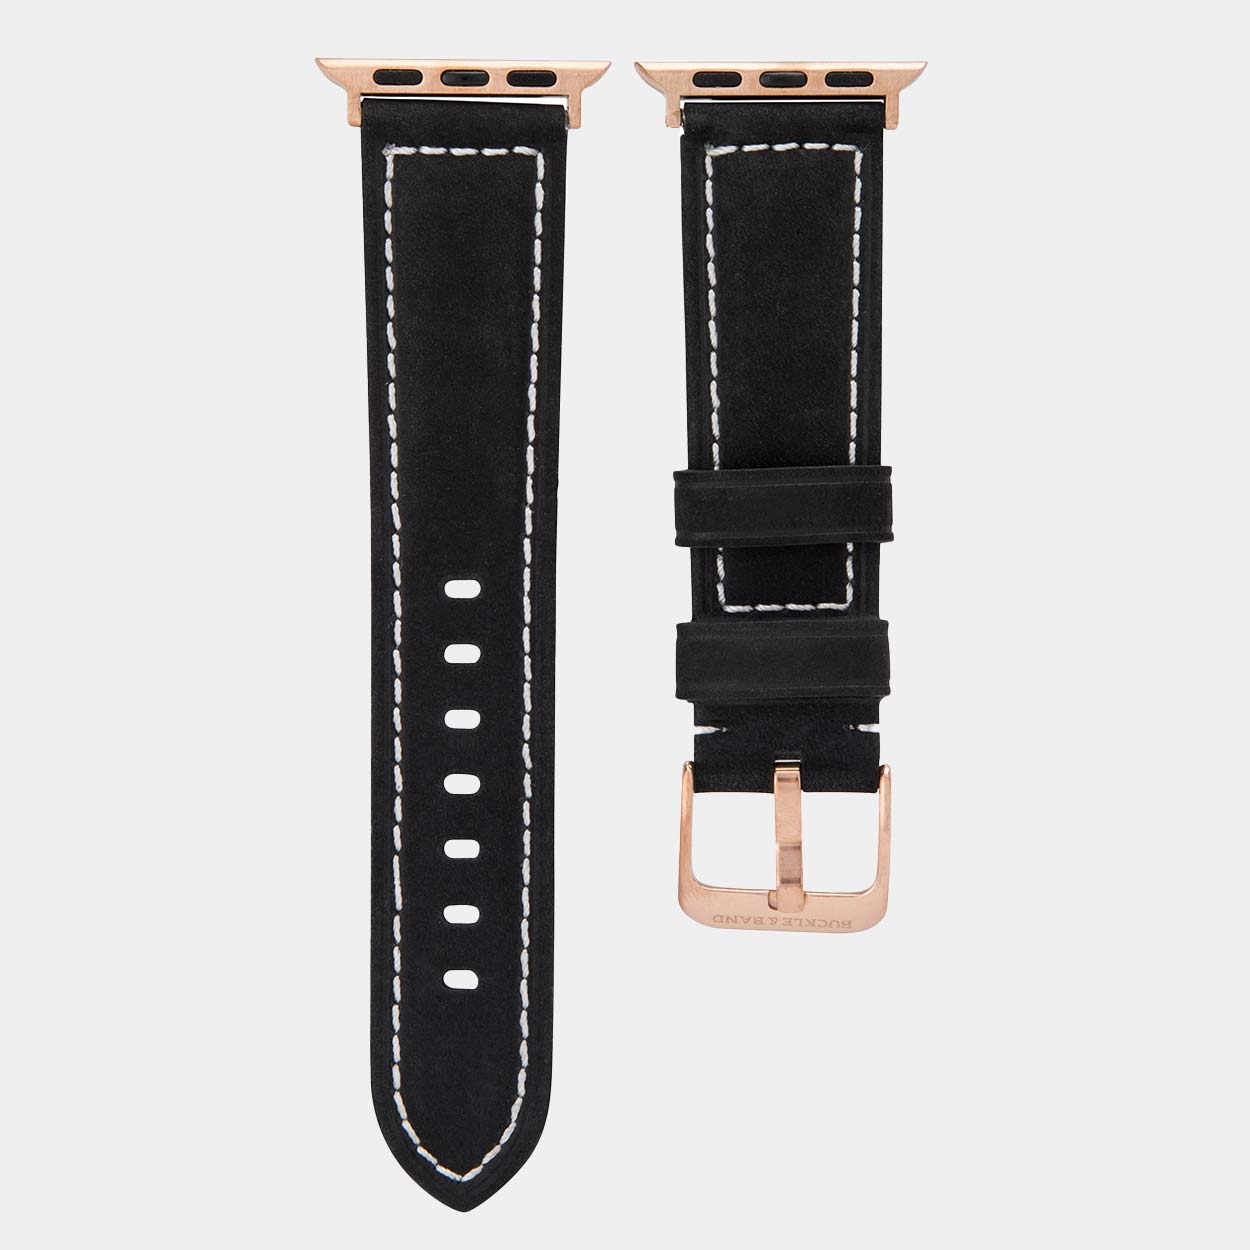 Pre-Loved Mila Apple Watch Straps - in Black, Brown or Red Suede - Buckle & Band - PL-MIL-44-BLK-GL